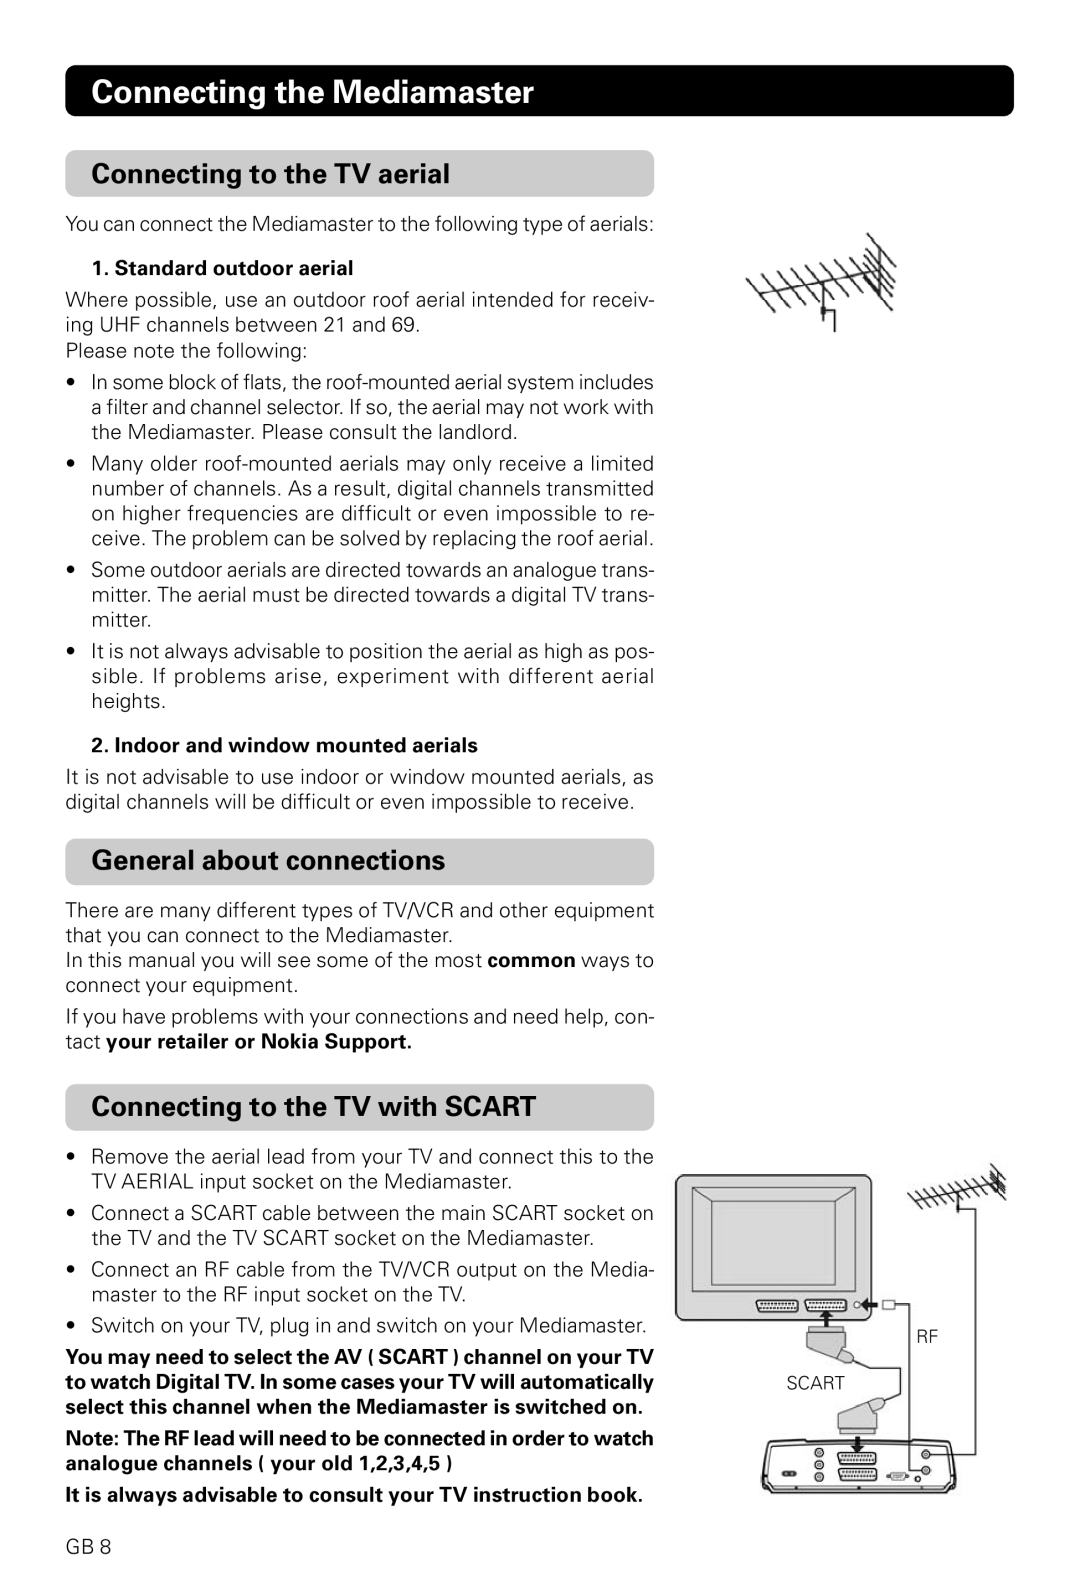 Nokia 221 T owner manual Connecting to the TV aerial, General about connections, Connecting to the TV with SCART 